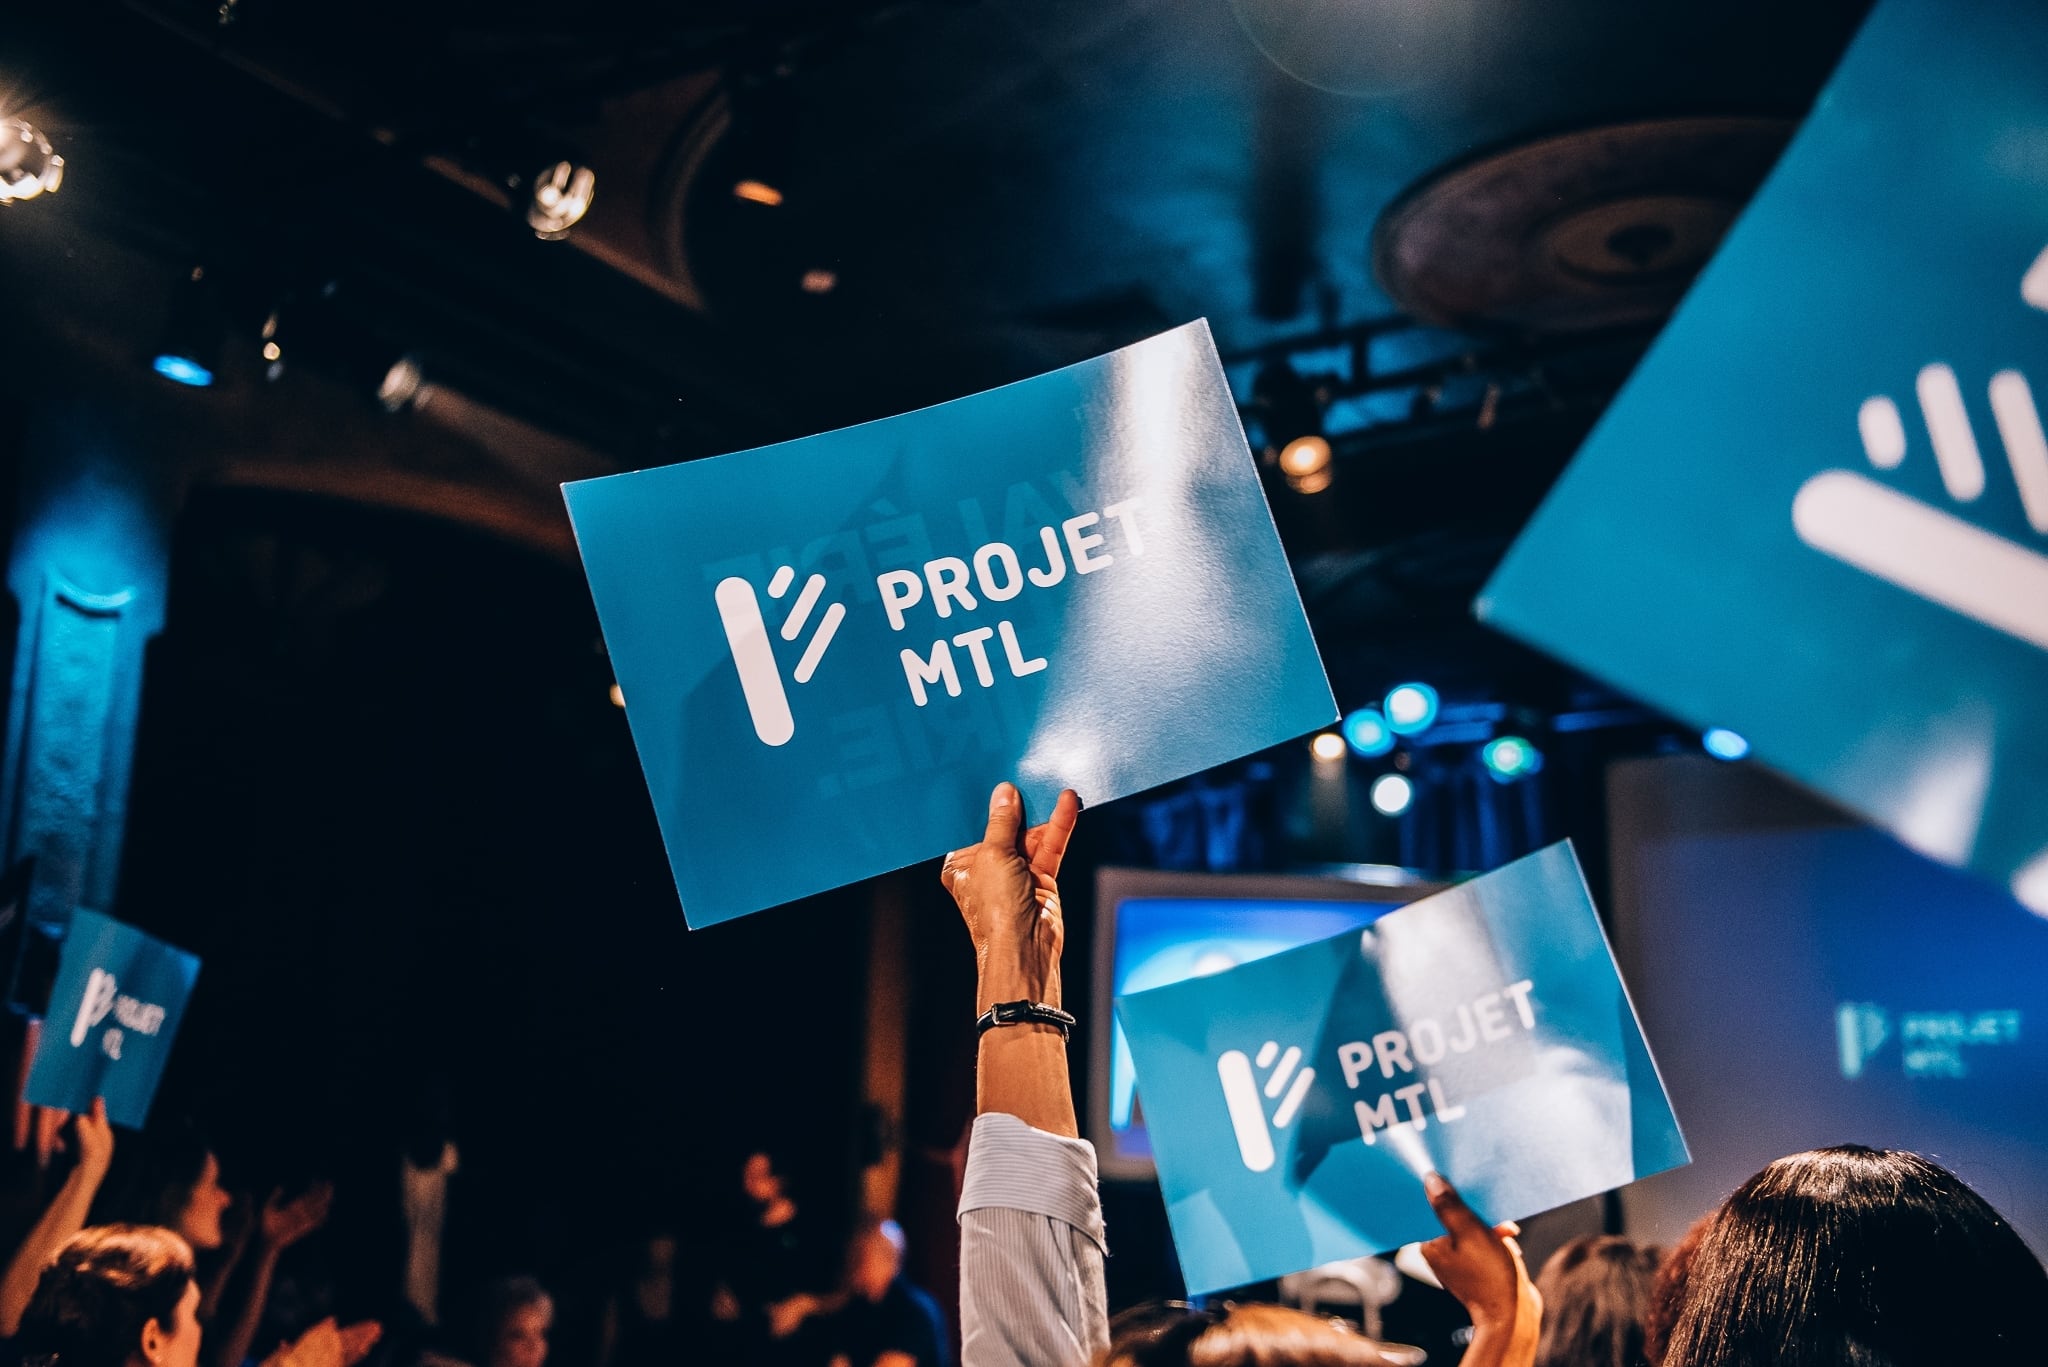 A new generation of leaders joins the Projet Montréal team